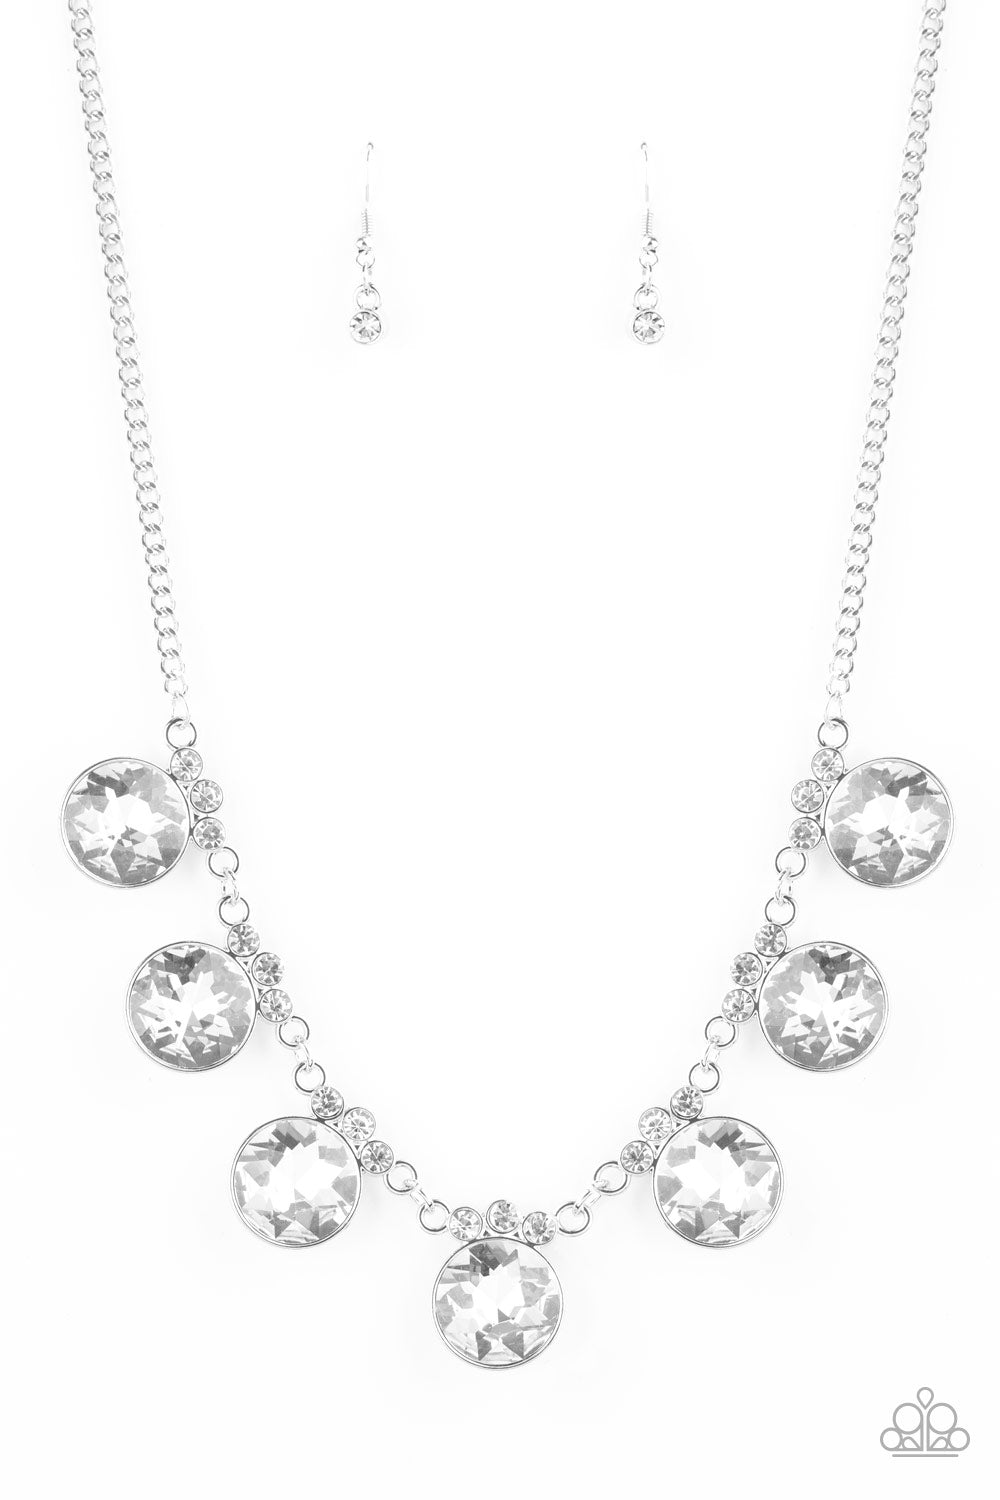 GLOW-Getter Glamour White Necklace - Paparazzi Accessories